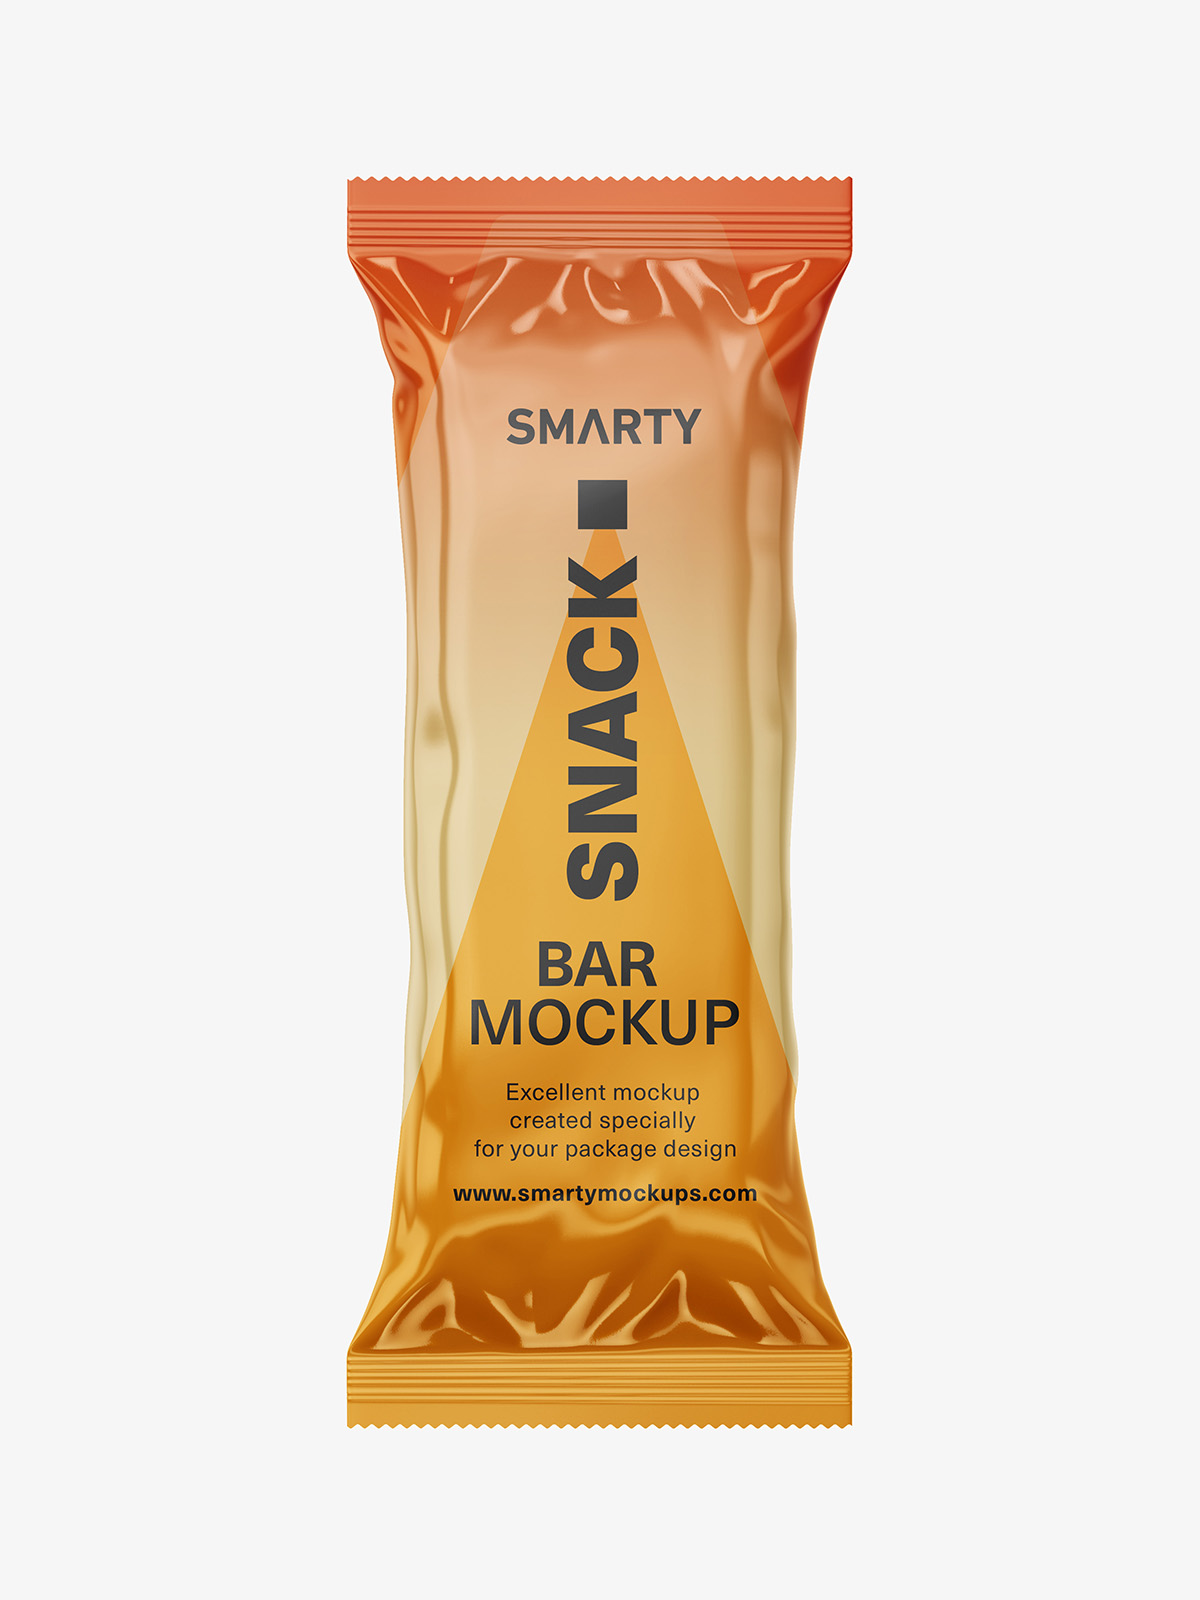 Download Snack pack / food pouch mockup - Smarty Mockups